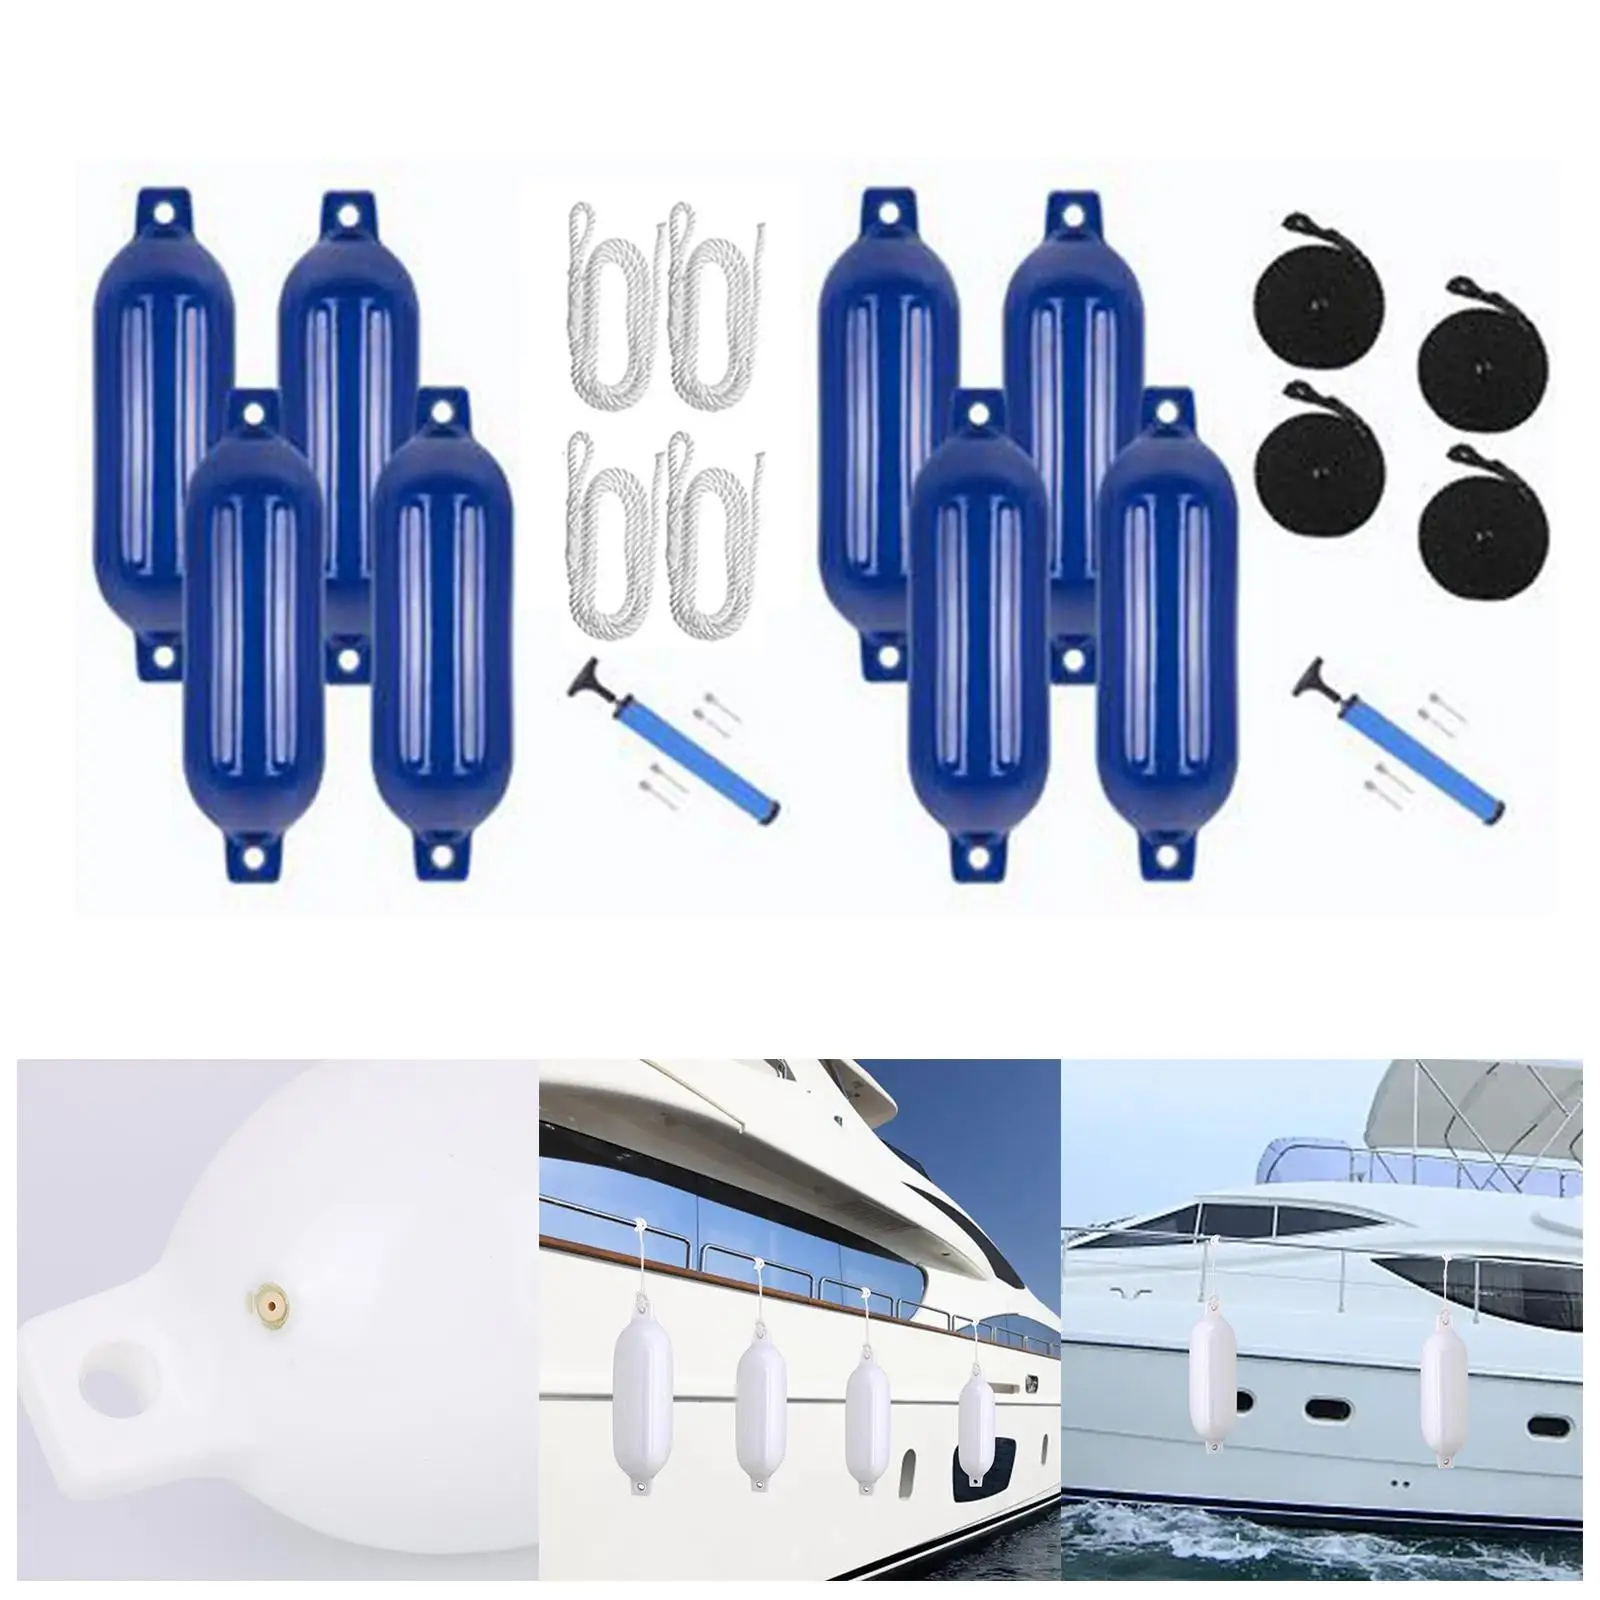 4x Marine Boat 1 Air Pump Accessory Boat Bumperss with 4 Ropes